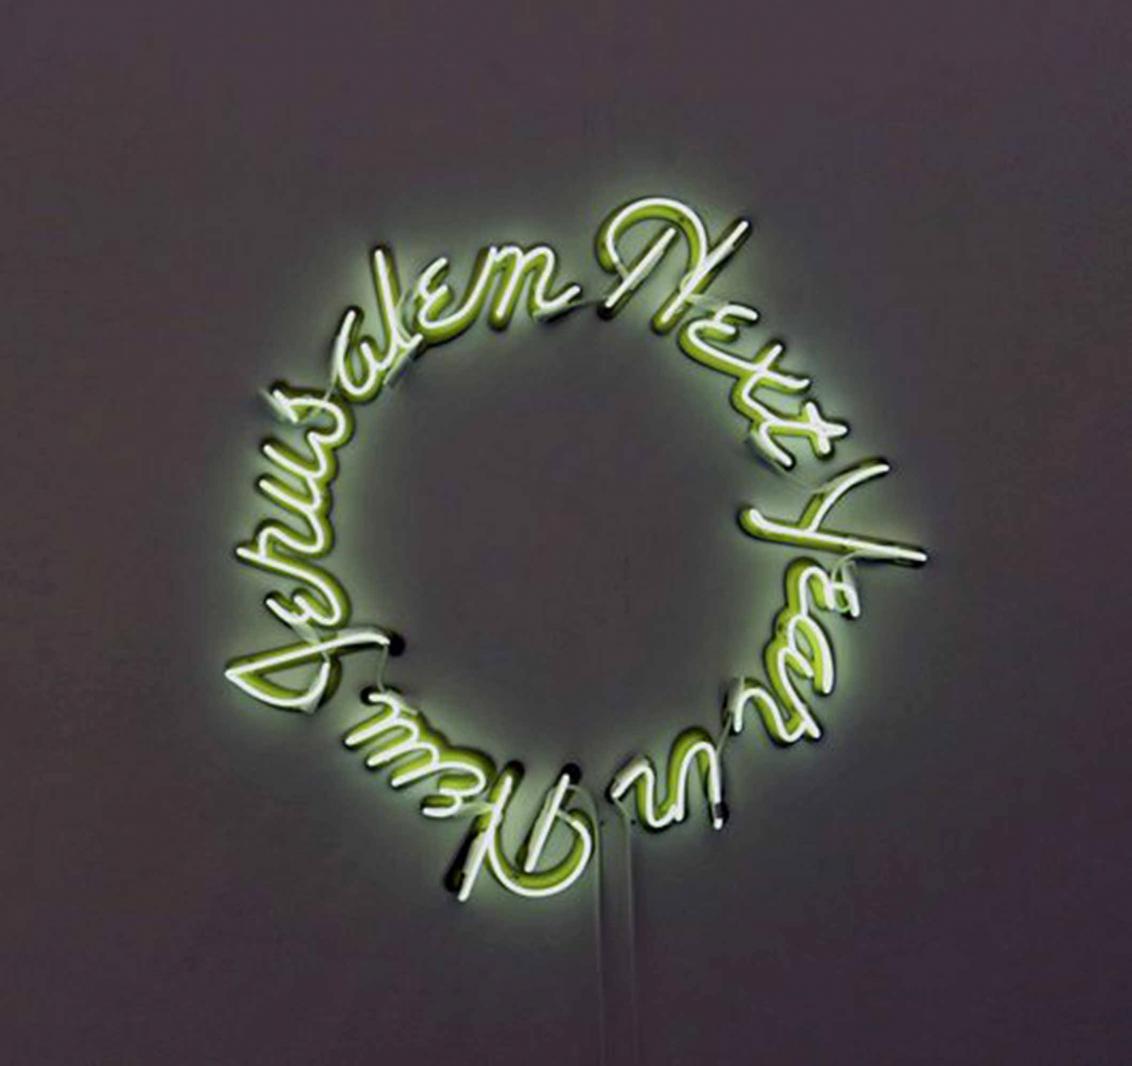 Circular lettering “Next Year in New Jerusalem” in neon